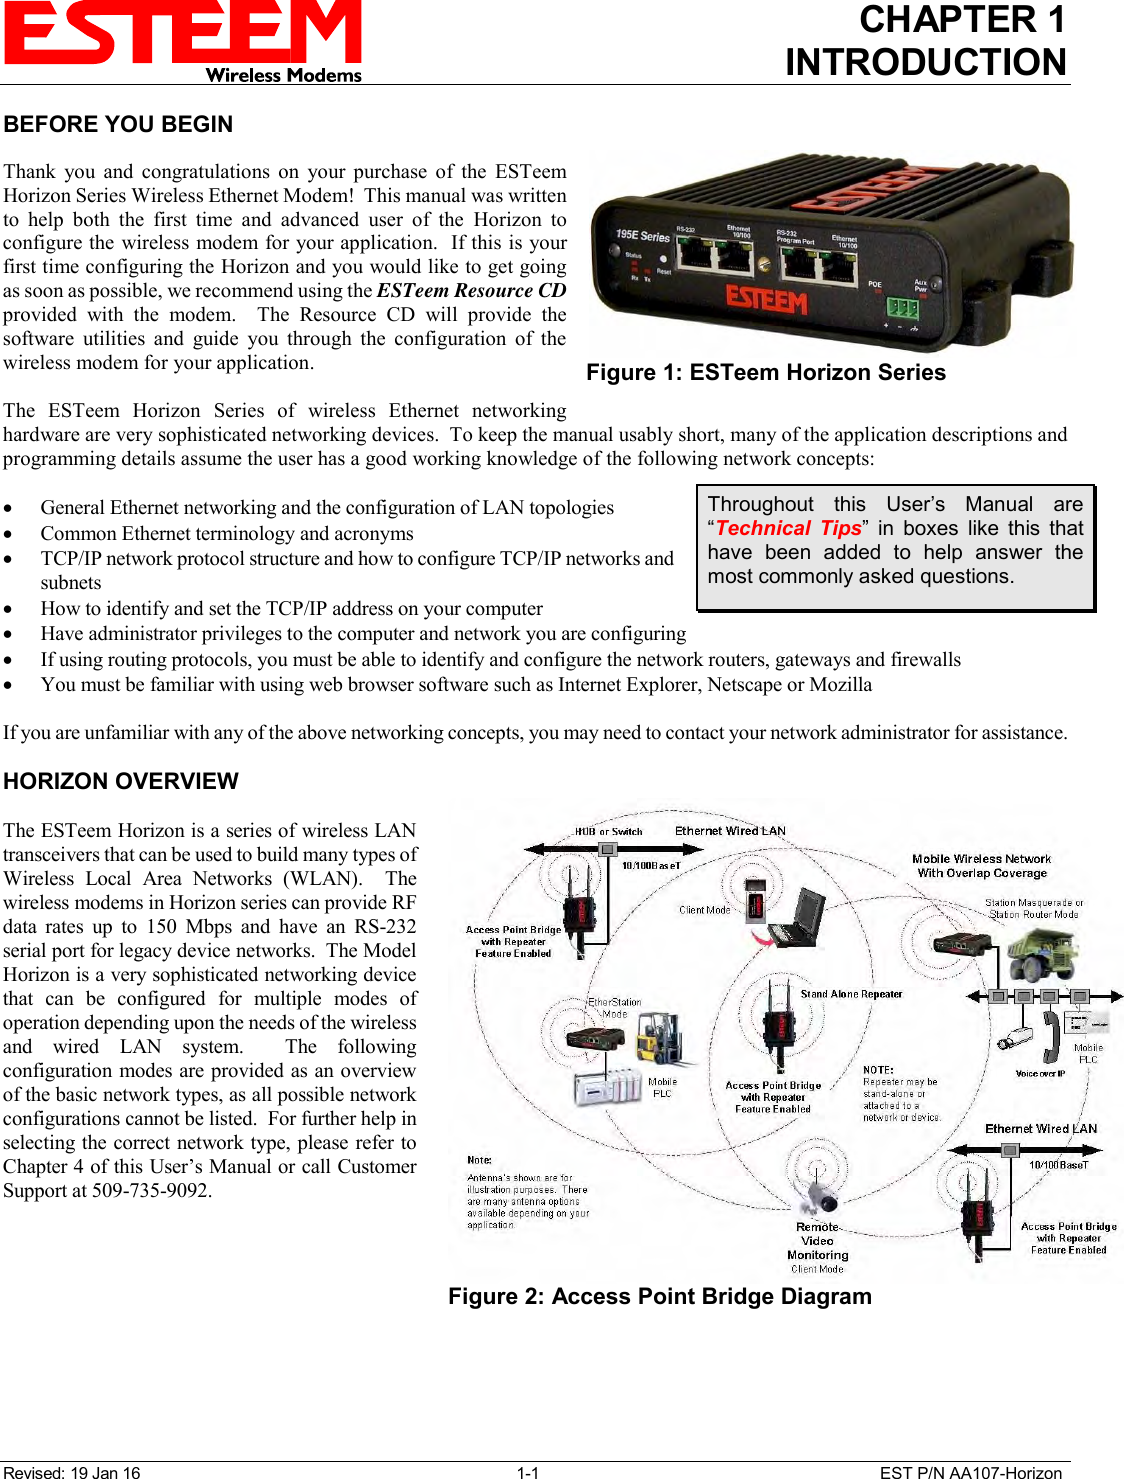 CHAPTER 1 INTRODUCTION  Revised: 19 Jan 16  1-1  EST P/N AA107-Horizon BEFORE YOU BEGIN  Thank  you  and  congratulations  on  your  purchase  of  the  ESTeem Horizon Series Wireless Ethernet Modem!  This manual was written to  help  both  the  first  time  and  advanced  user  of  the  Horizon  to configure the wireless modem for your application.  If this is your first time configuring the Horizon and you would like to get going as soon as possible, we recommend using the ESTeem Resource CD provided  with  the  modem.    The  Resource  CD  will  provide  the software  utilities  and  guide  you  through  the  configuration  of  the wireless modem for your application.  The  ESTeem  Horizon  Series  of  wireless  Ethernet  networking hardware are very sophisticated networking devices.  To keep the manual usably short, many of the application descriptions and programming details assume the user has a good working knowledge of the following network concepts:   General Ethernet networking and the configuration of LAN topologies   Common Ethernet terminology and acronyms  TCP/IP network protocol structure and how to configure TCP/IP networks and subnets  How to identify and set the TCP/IP address on your computer  Have administrator privileges to the computer and network you are configuring  If using routing protocols, you must be able to identify and configure the network routers, gateways and firewalls  You must be familiar with using web browser software such as Internet Explorer, Netscape or Mozilla  If you are unfamiliar with any of the above networking concepts, you may need to contact your network administrator for assistance.  HORIZON OVERVIEW  The ESTeem Horizon is a series of wireless LAN transceivers that can be used to build many types of Wireless  Local  Area  Networks  (WLAN).    The wireless modems in Horizon series can provide RF data  rates  up  to  150  Mbps  and  have  an  RS-232 serial port for legacy device networks.  The Model Horizon is a very sophisticated networking device that  can  be  configured  for  multiple  modes  of operation depending upon the needs of the wireless and  wired  LAN  system.    The  following configuration modes are provided as an overview of the basic network types, as all possible network configurations cannot be listed.  For further help in selecting the correct network type, please refer to Chapter 4 of this User’s Manual or call Customer Support at 509-735-9092.   Figure 1: ESTeem Horizon Series  Throughout  this  User’s  Manual  are “Technical  Tips”  in  boxes  like  this  that have  been  added  to  help  answer  the most commonly asked questions.  Figure 2: Access Point Bridge Diagram  